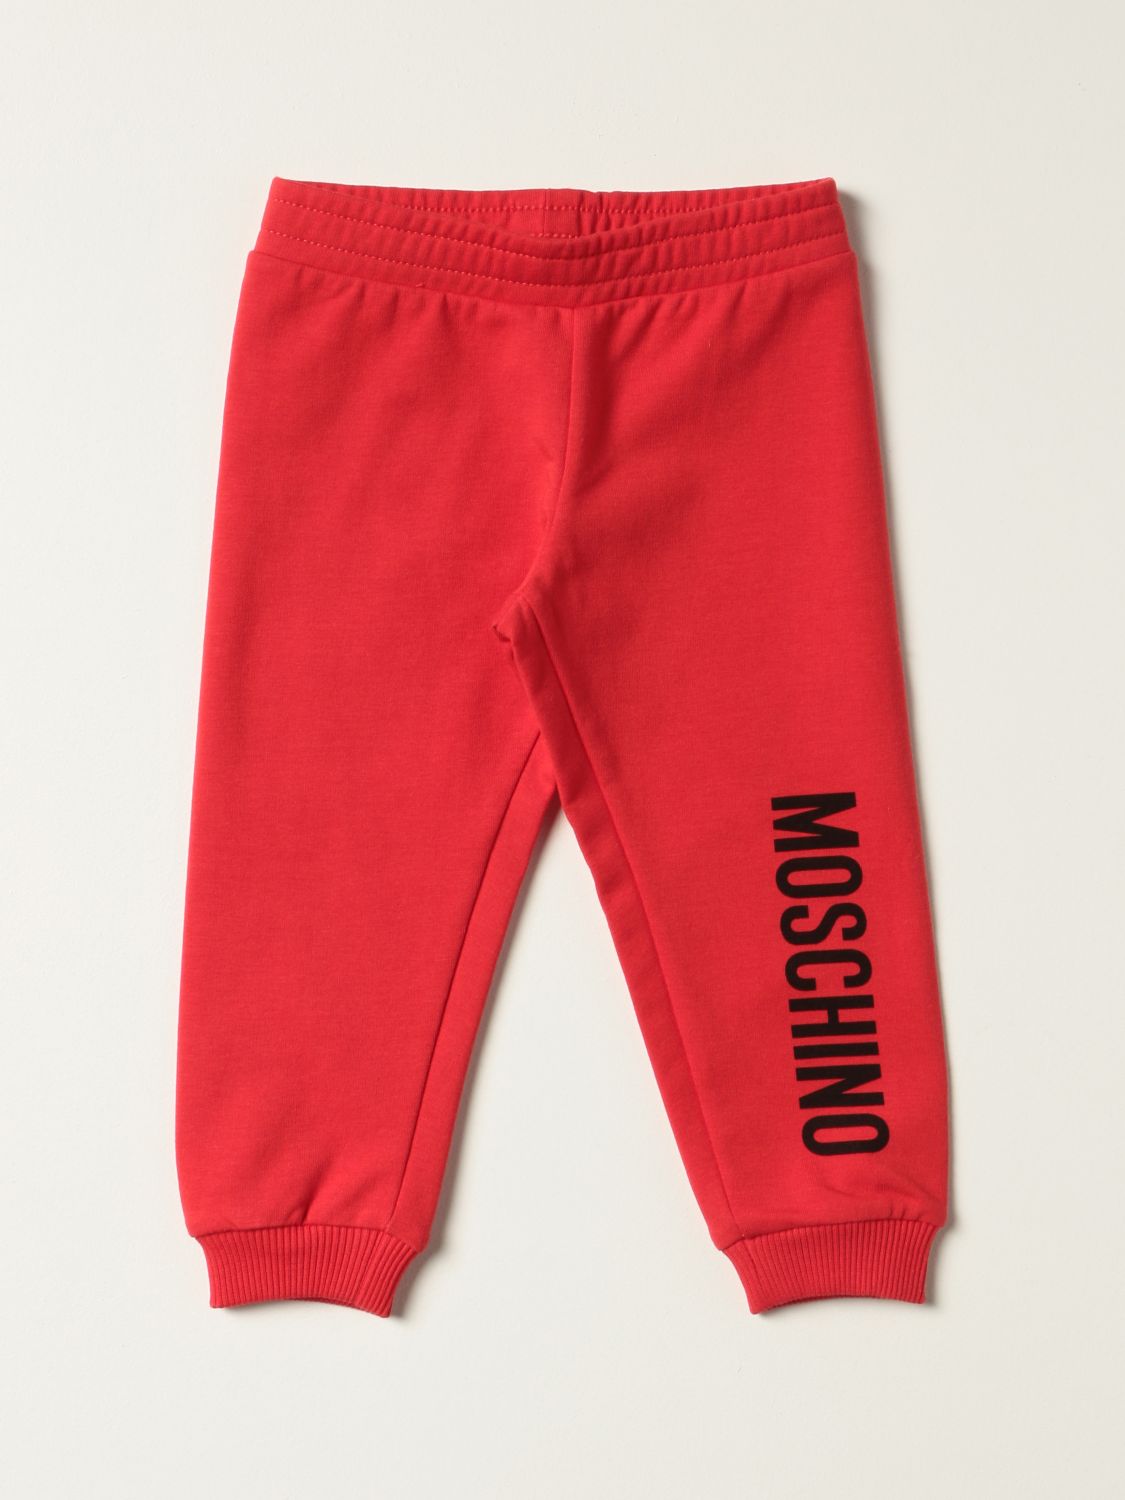 MOSCHINO BABY: jogging pants with logo - Red | Moschino Baby pants ...